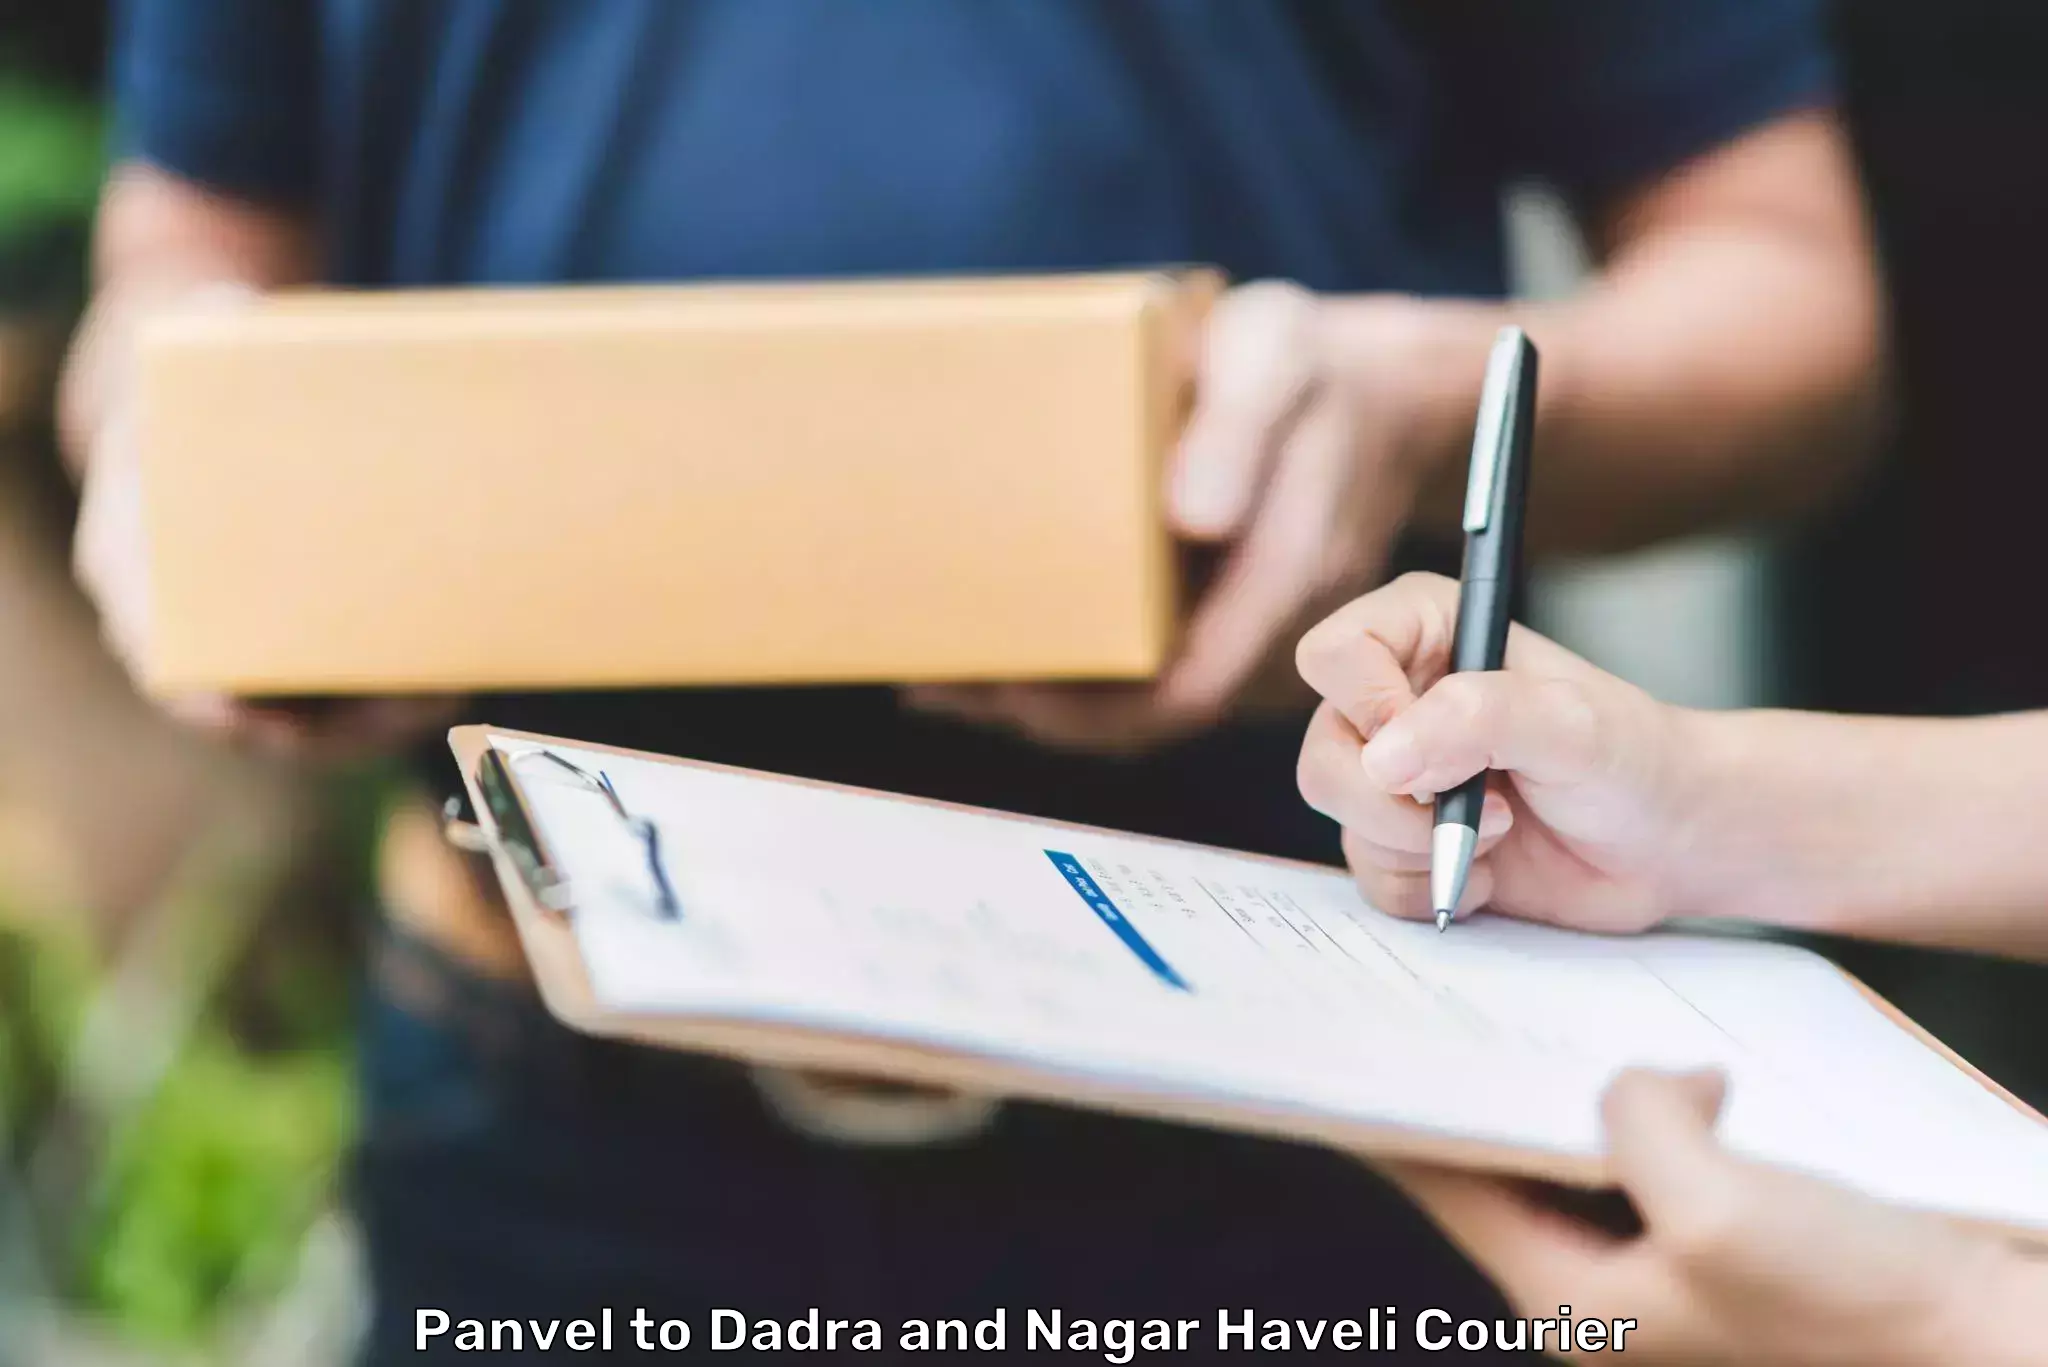 Express courier capabilities in Panvel to Dadra and Nagar Haveli